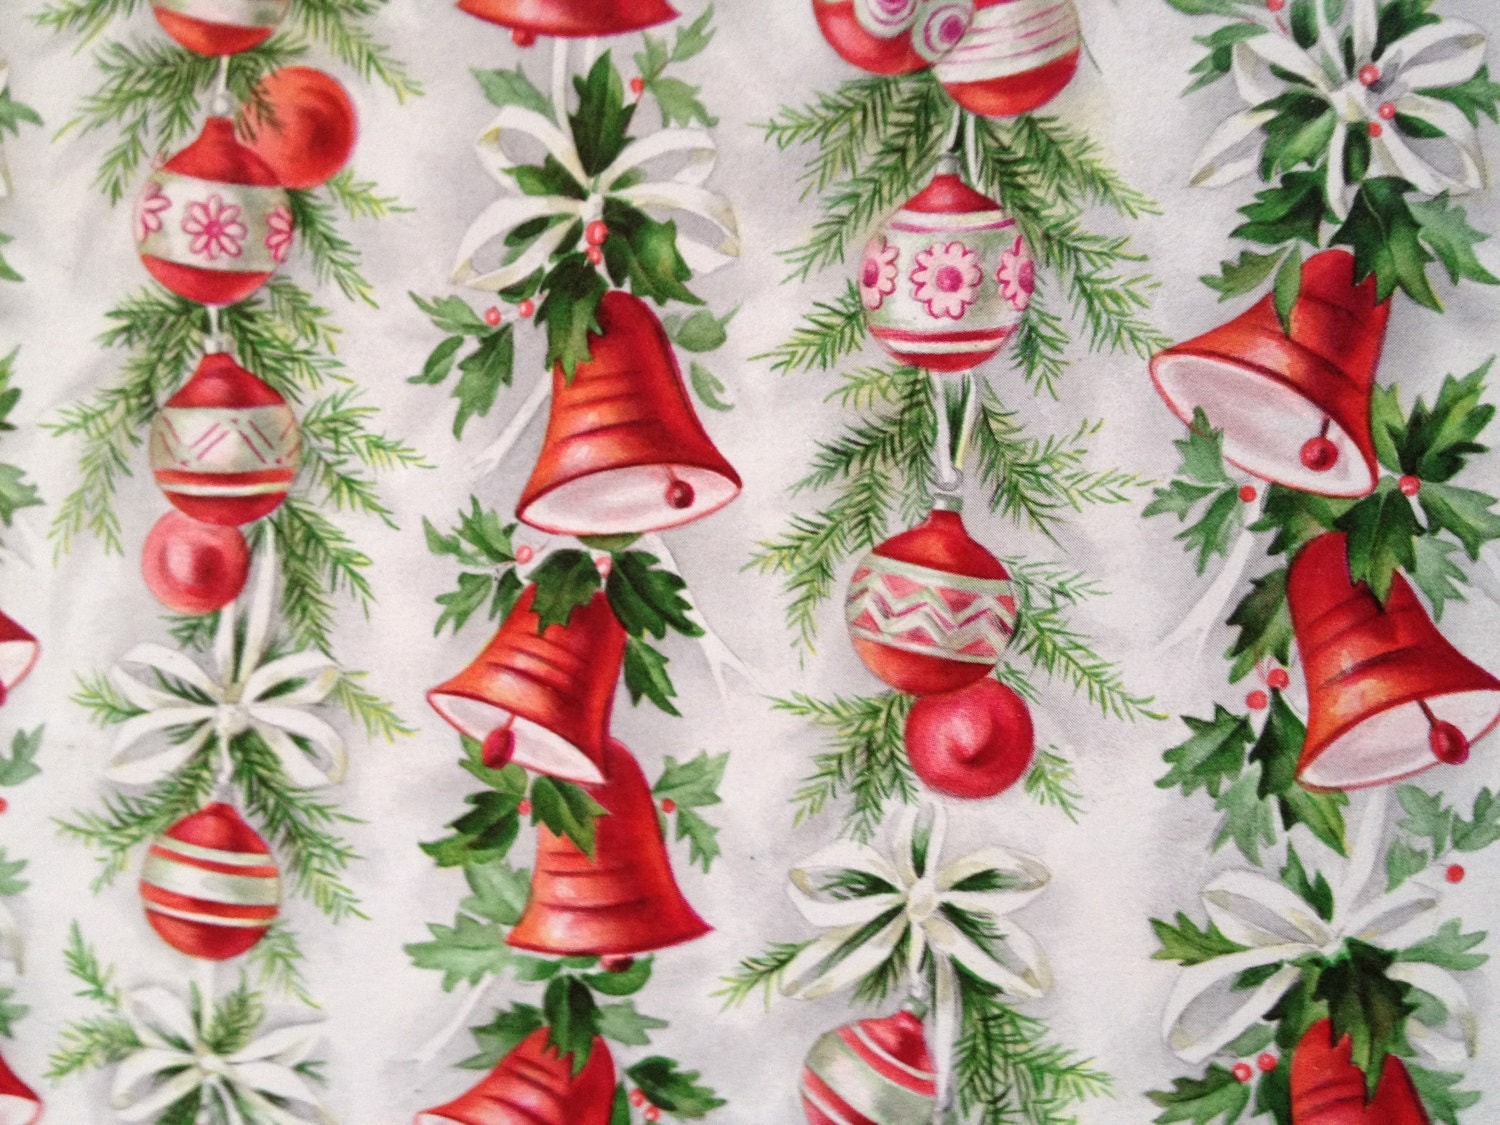 2 Sheets Vintage Christmas Wrapping Paper